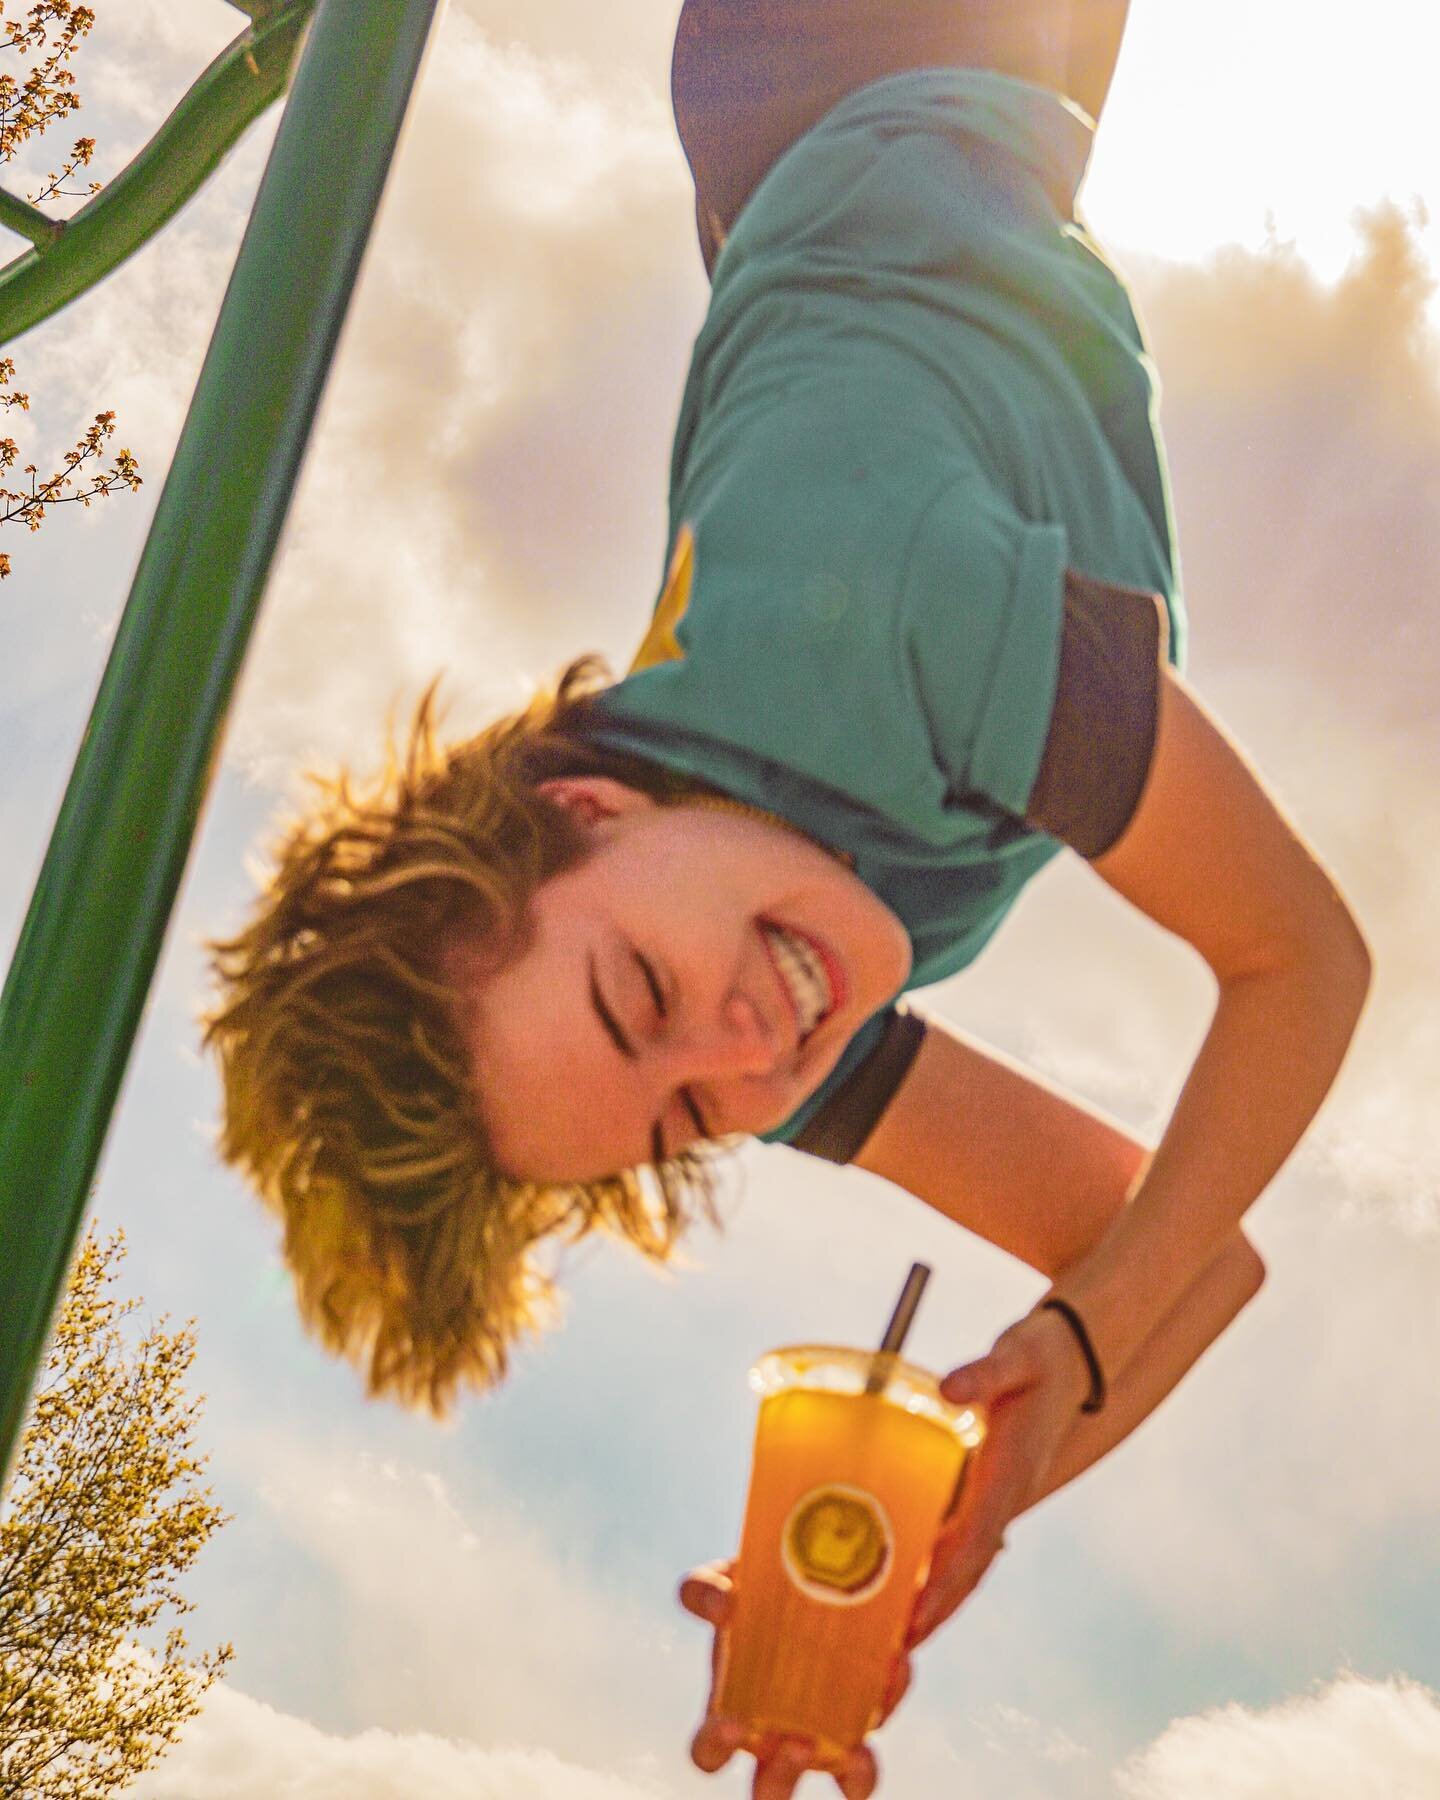 How&rsquo;s it hangin?
.
Our Passion Fruit Smoothie is packed with flavor, and has that authentic passion fruit flavor we all know and love! Perfect on hot, summer days 🥵 
.
#passionfruitsmoothie #smoothie #refreshingsmoothie #tastysmoothie #smoothi